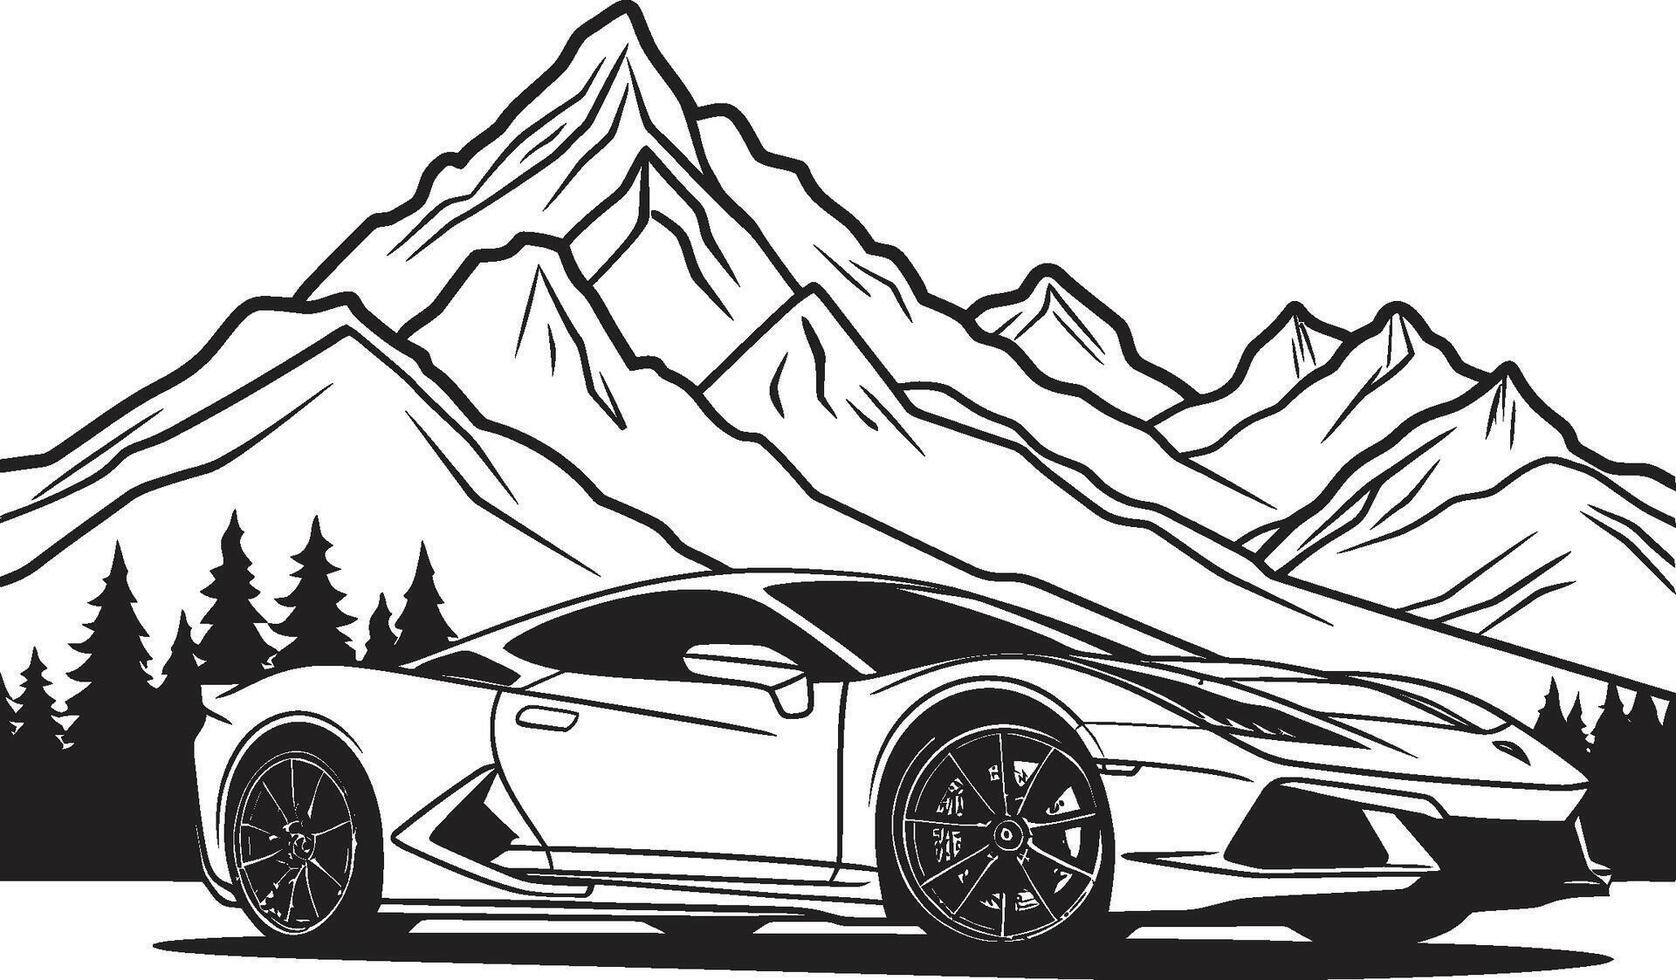 Pinnacle Prestige Black Vector Symbol of a Sports Car Excelling on Mountain Roads Epic Elevation Sleek Black Logo Design with a Dynamic Sports Car Icon on Mountainous Trails